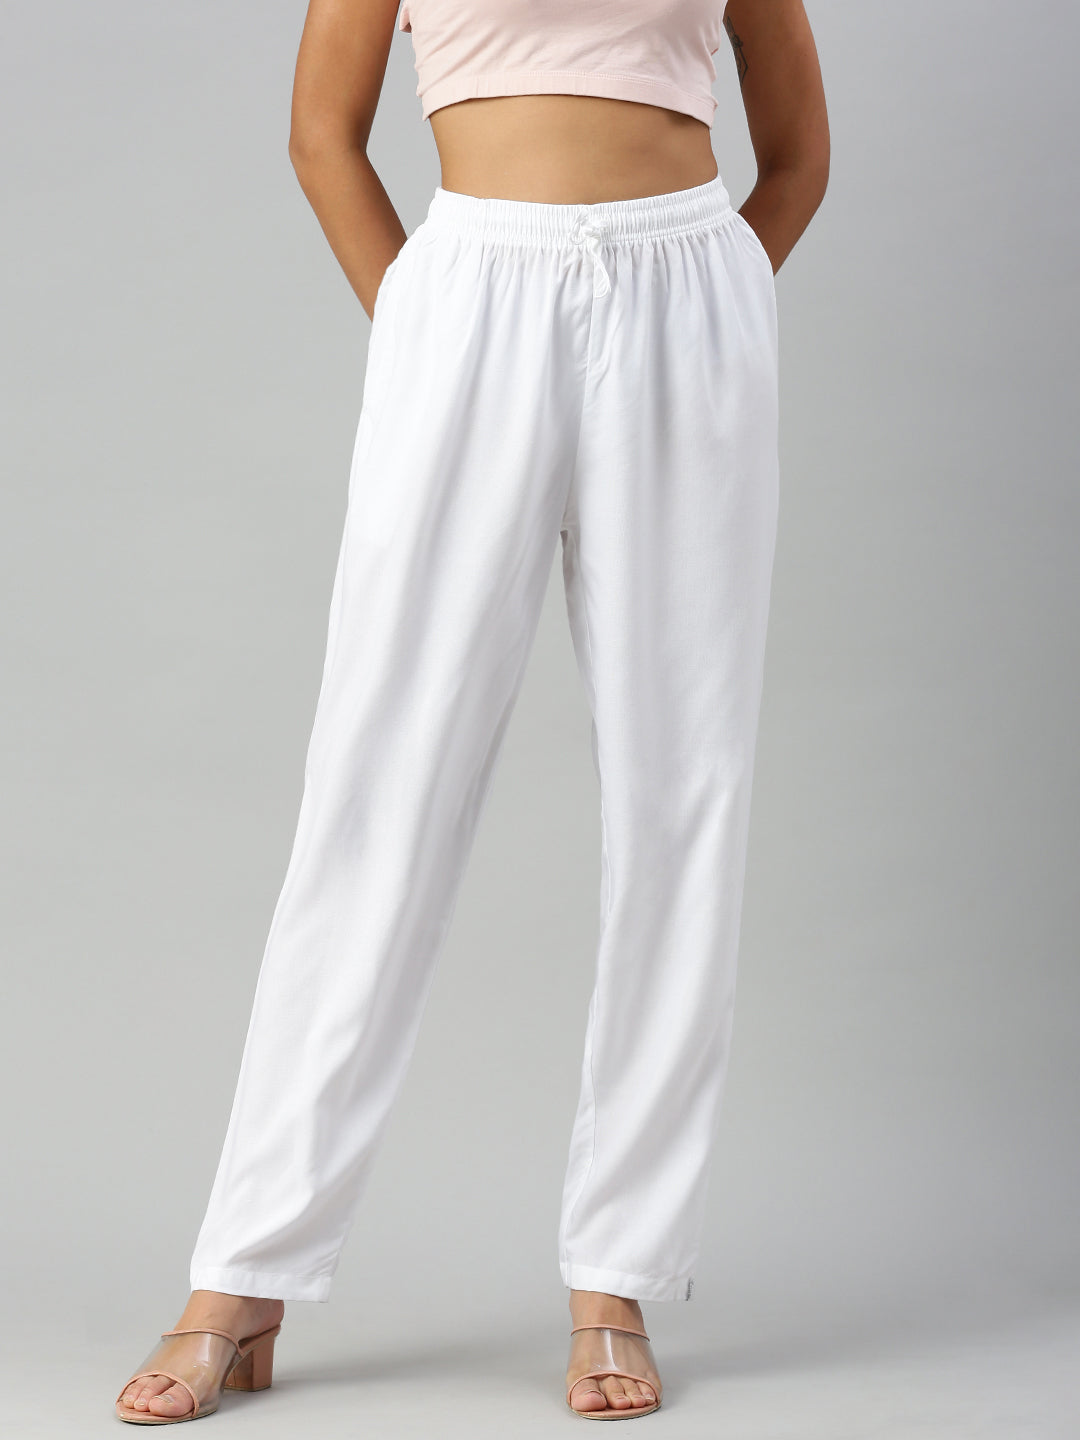 Second Order Cotton Linen Pleated Trousers White Men Informal Pants  Straight Fit | eBay